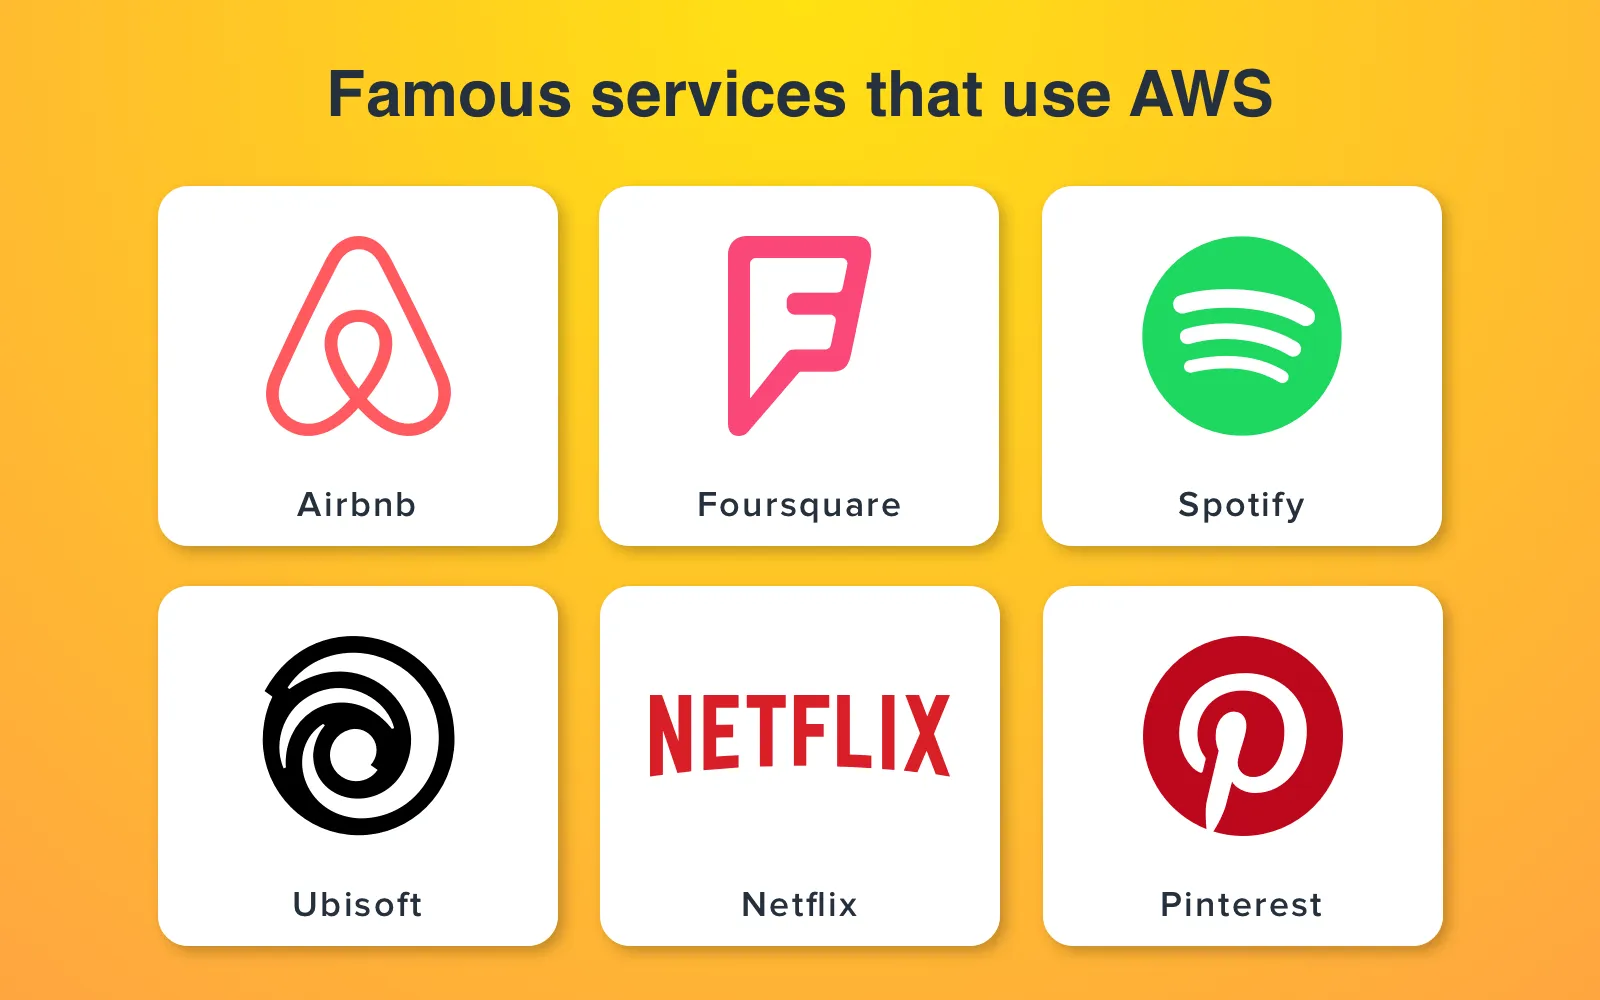 What companies use Amazon Web Services